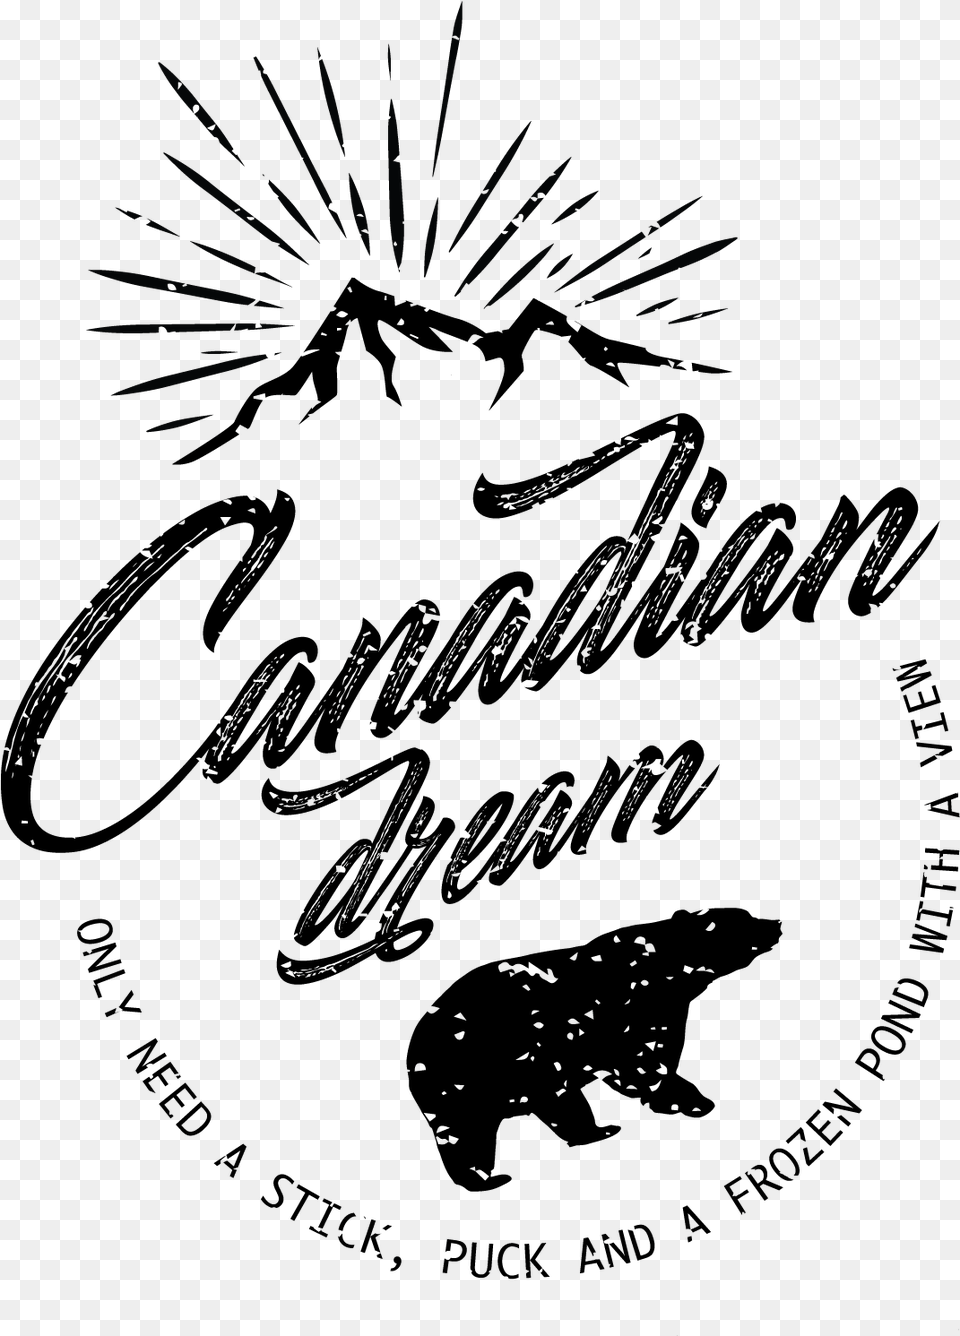 I Decided To Make A Vintage Looking Logo Grizzly Bear, Fireworks Png